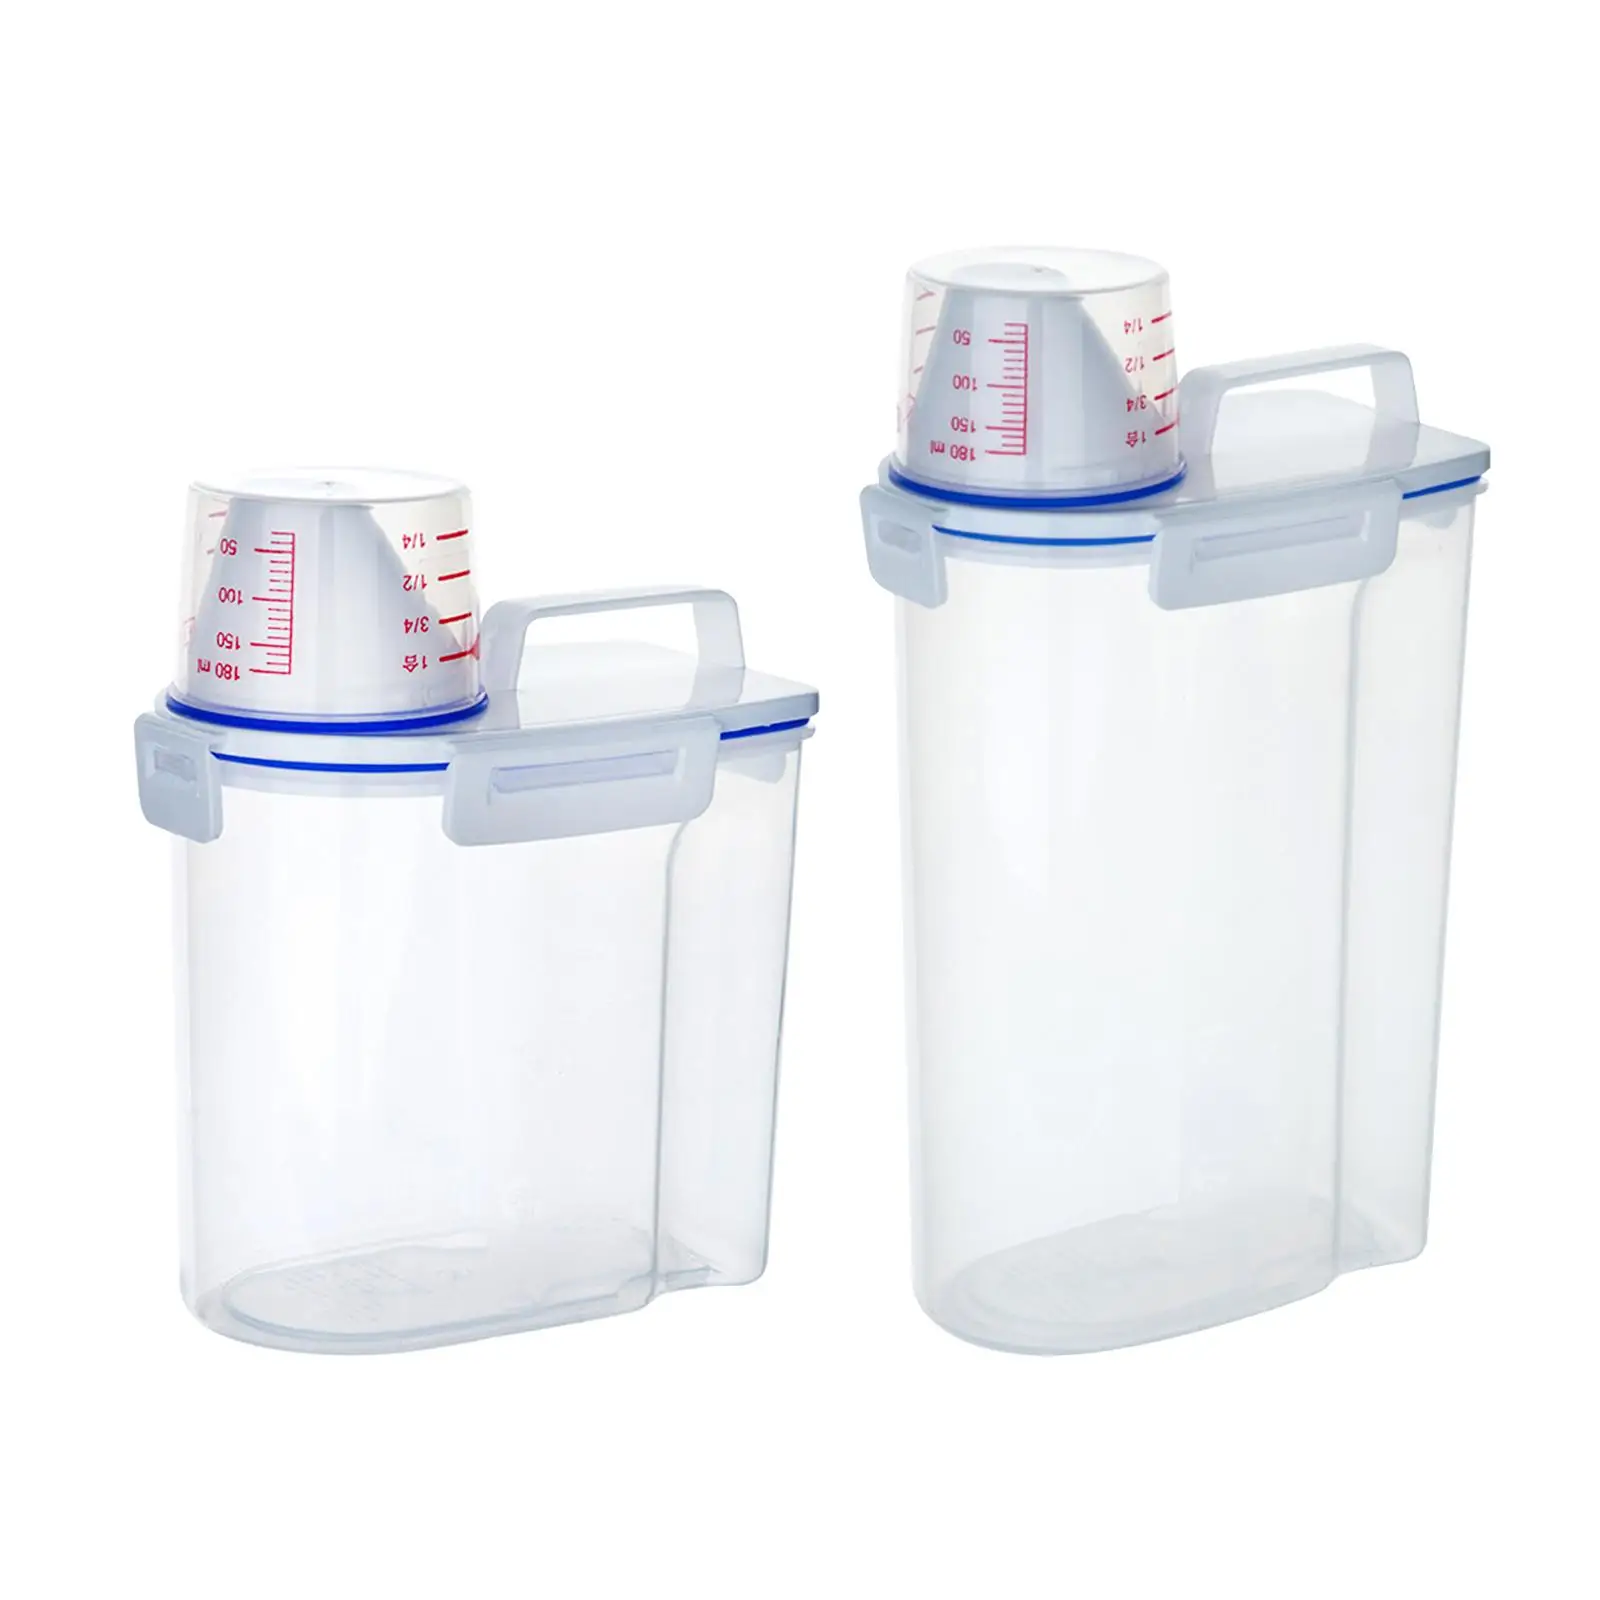 

Sealed Dry Food Storage Container Storage Canister with Measuring Cup Cereal Container for Candy Snack Rice Cereal Cookies